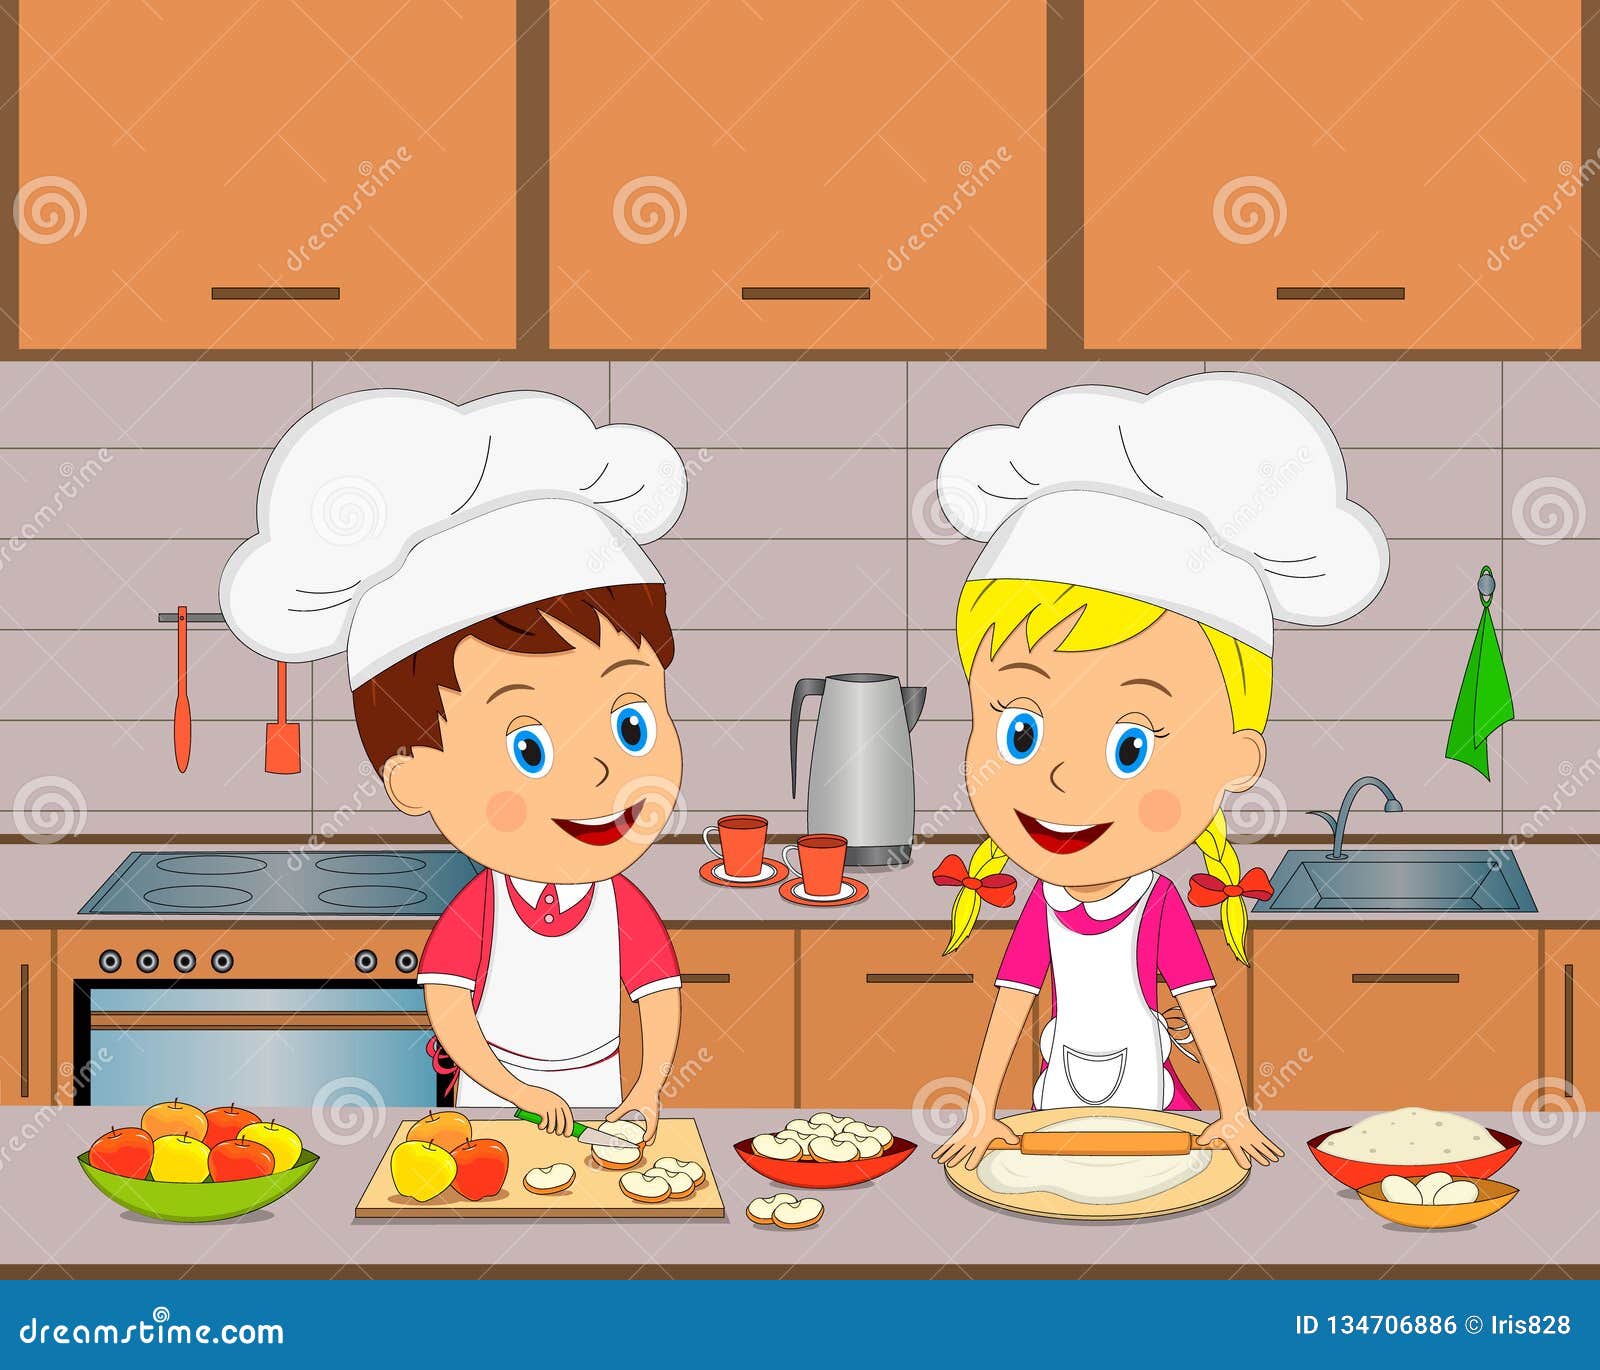 Boy and girl are cooking stock vector. Illustration of kitchen - 134706886